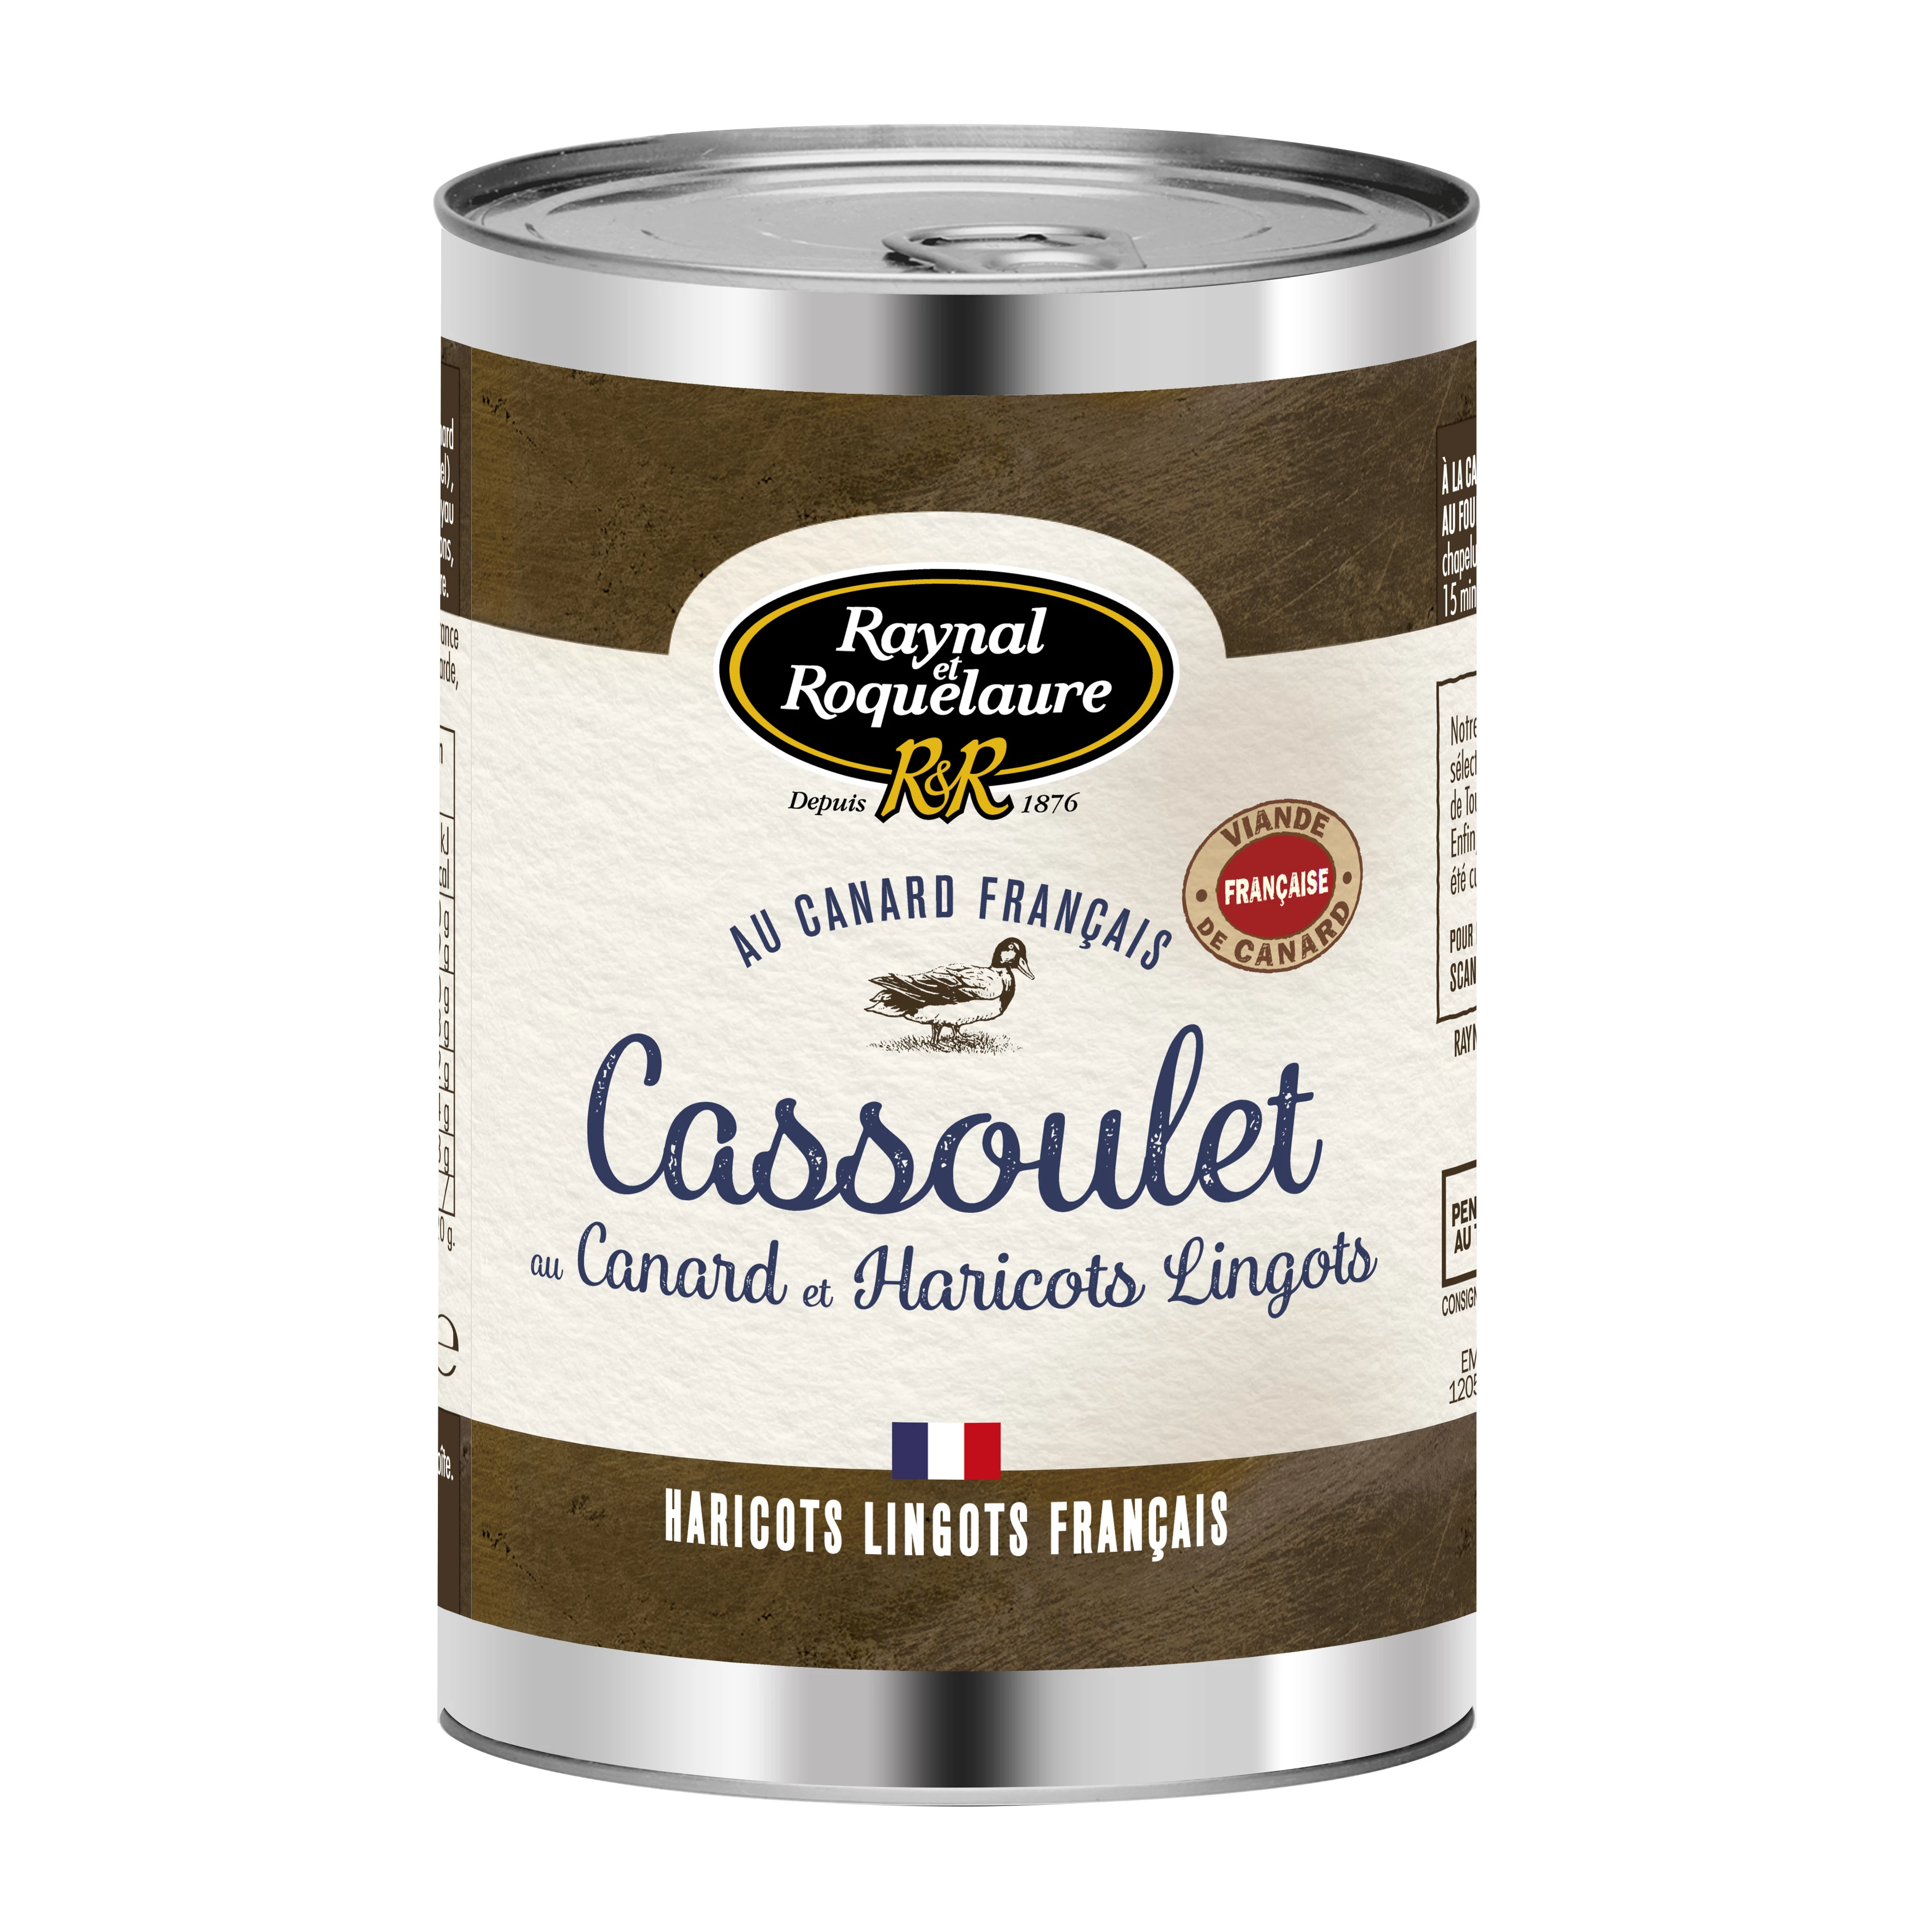 Duck cassoulet cooked dish 420g - RAYNAL ET ROQUELAURE